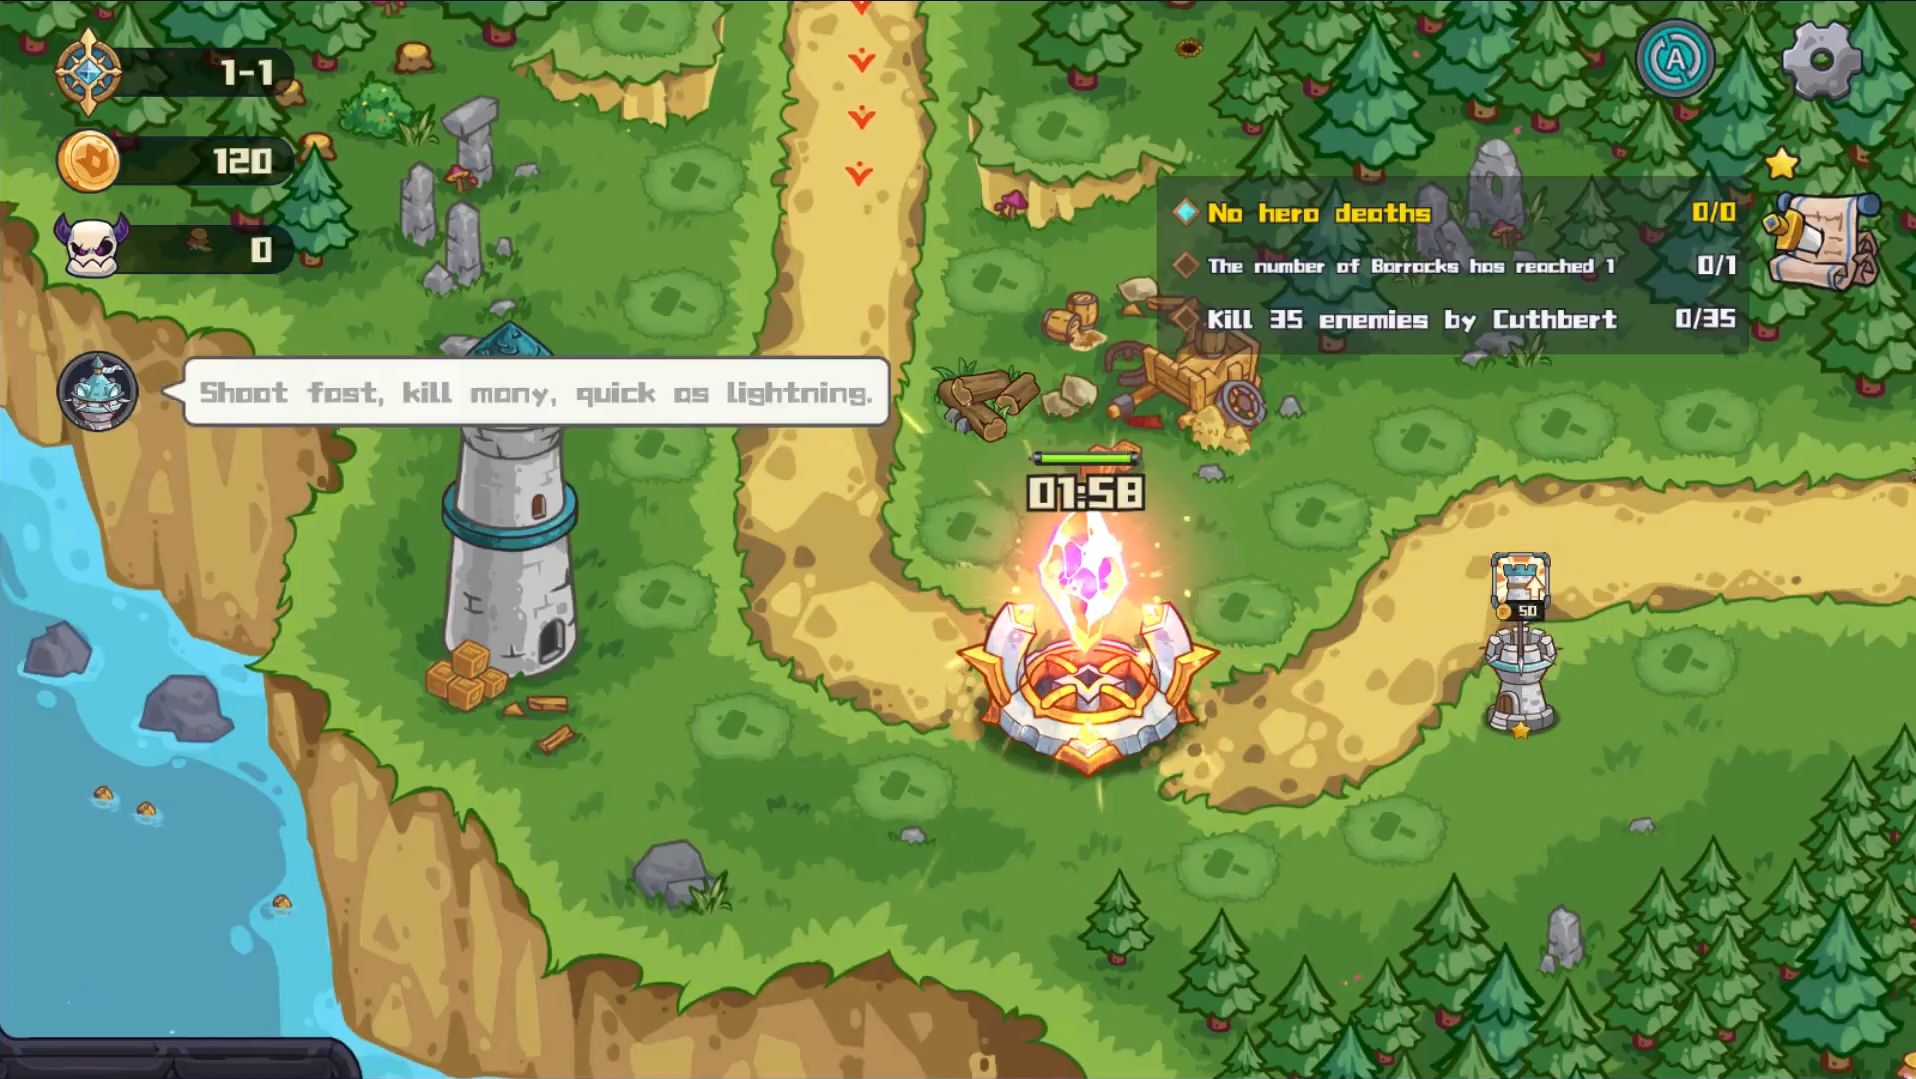 Full version of Android Fantasy game apk Chrono Crystal - Tower Defense for tablet and phone.